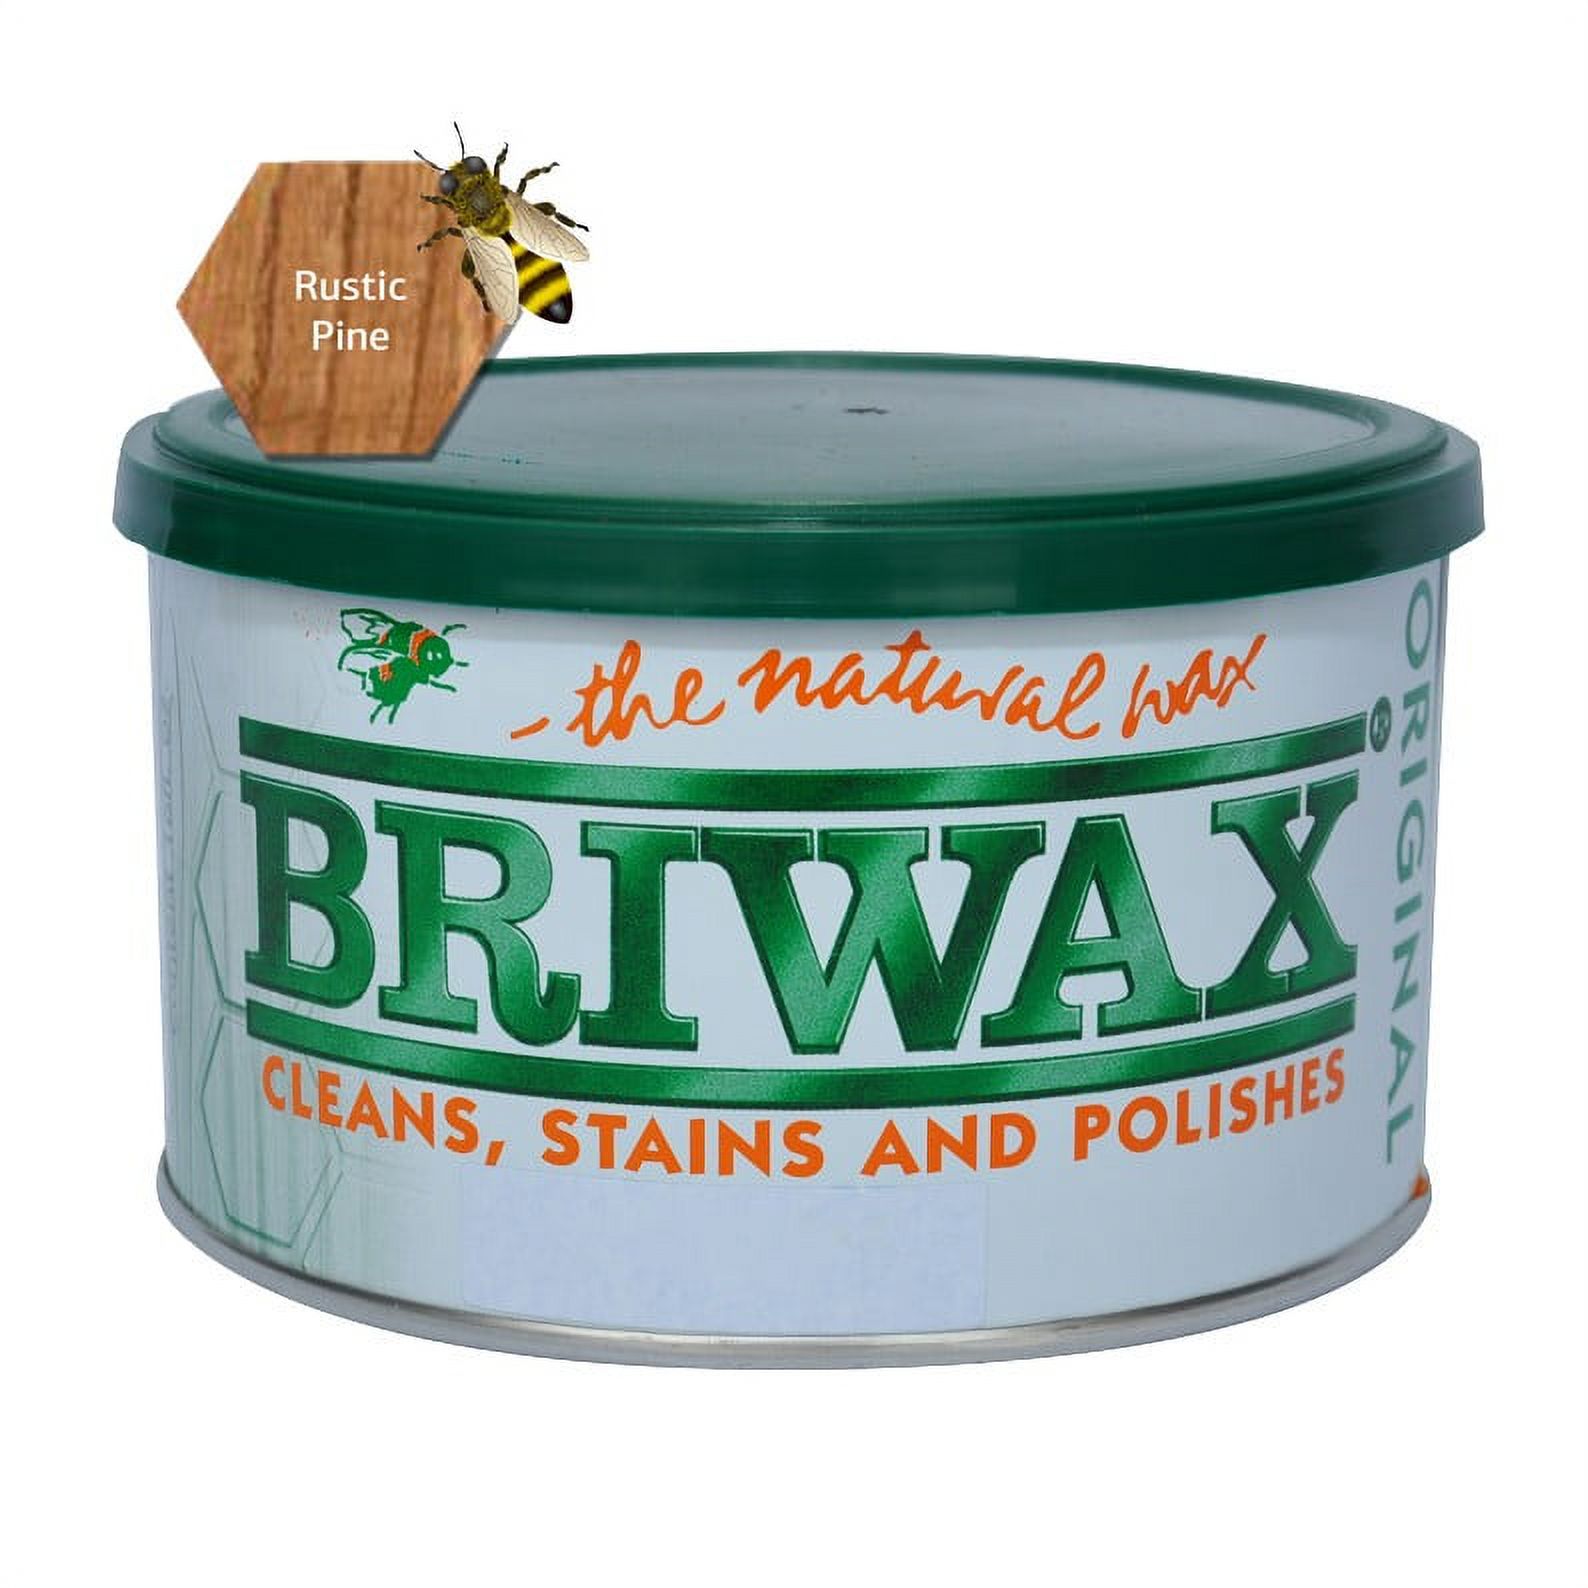 Briwax (Rustic Pine) Furniture Wax Polish, Cleans, Stains, and Polishes 